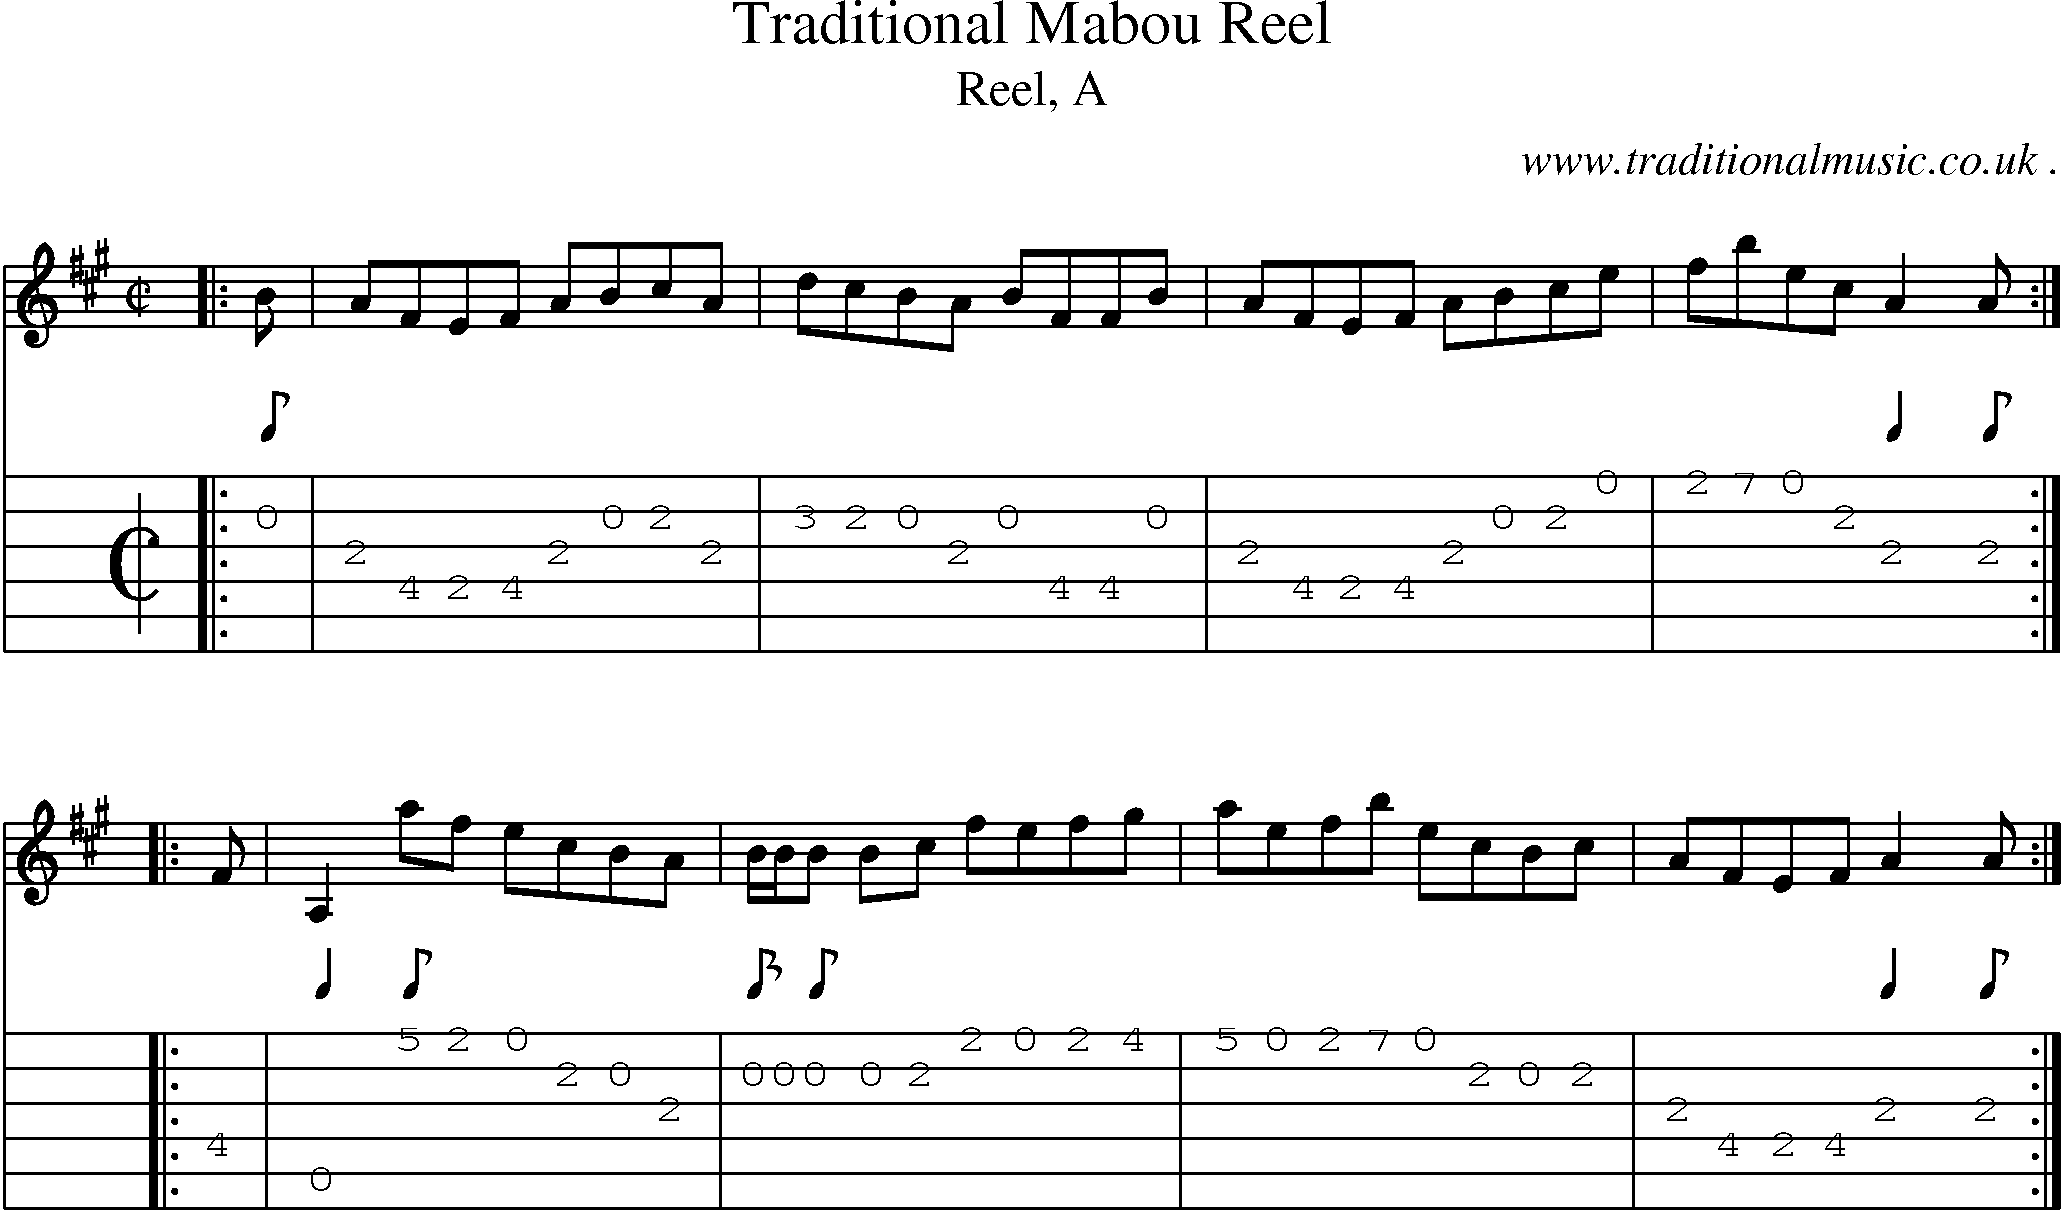 Sheet-music  score, Chords and Guitar Tabs for Traditional Mabou Reel